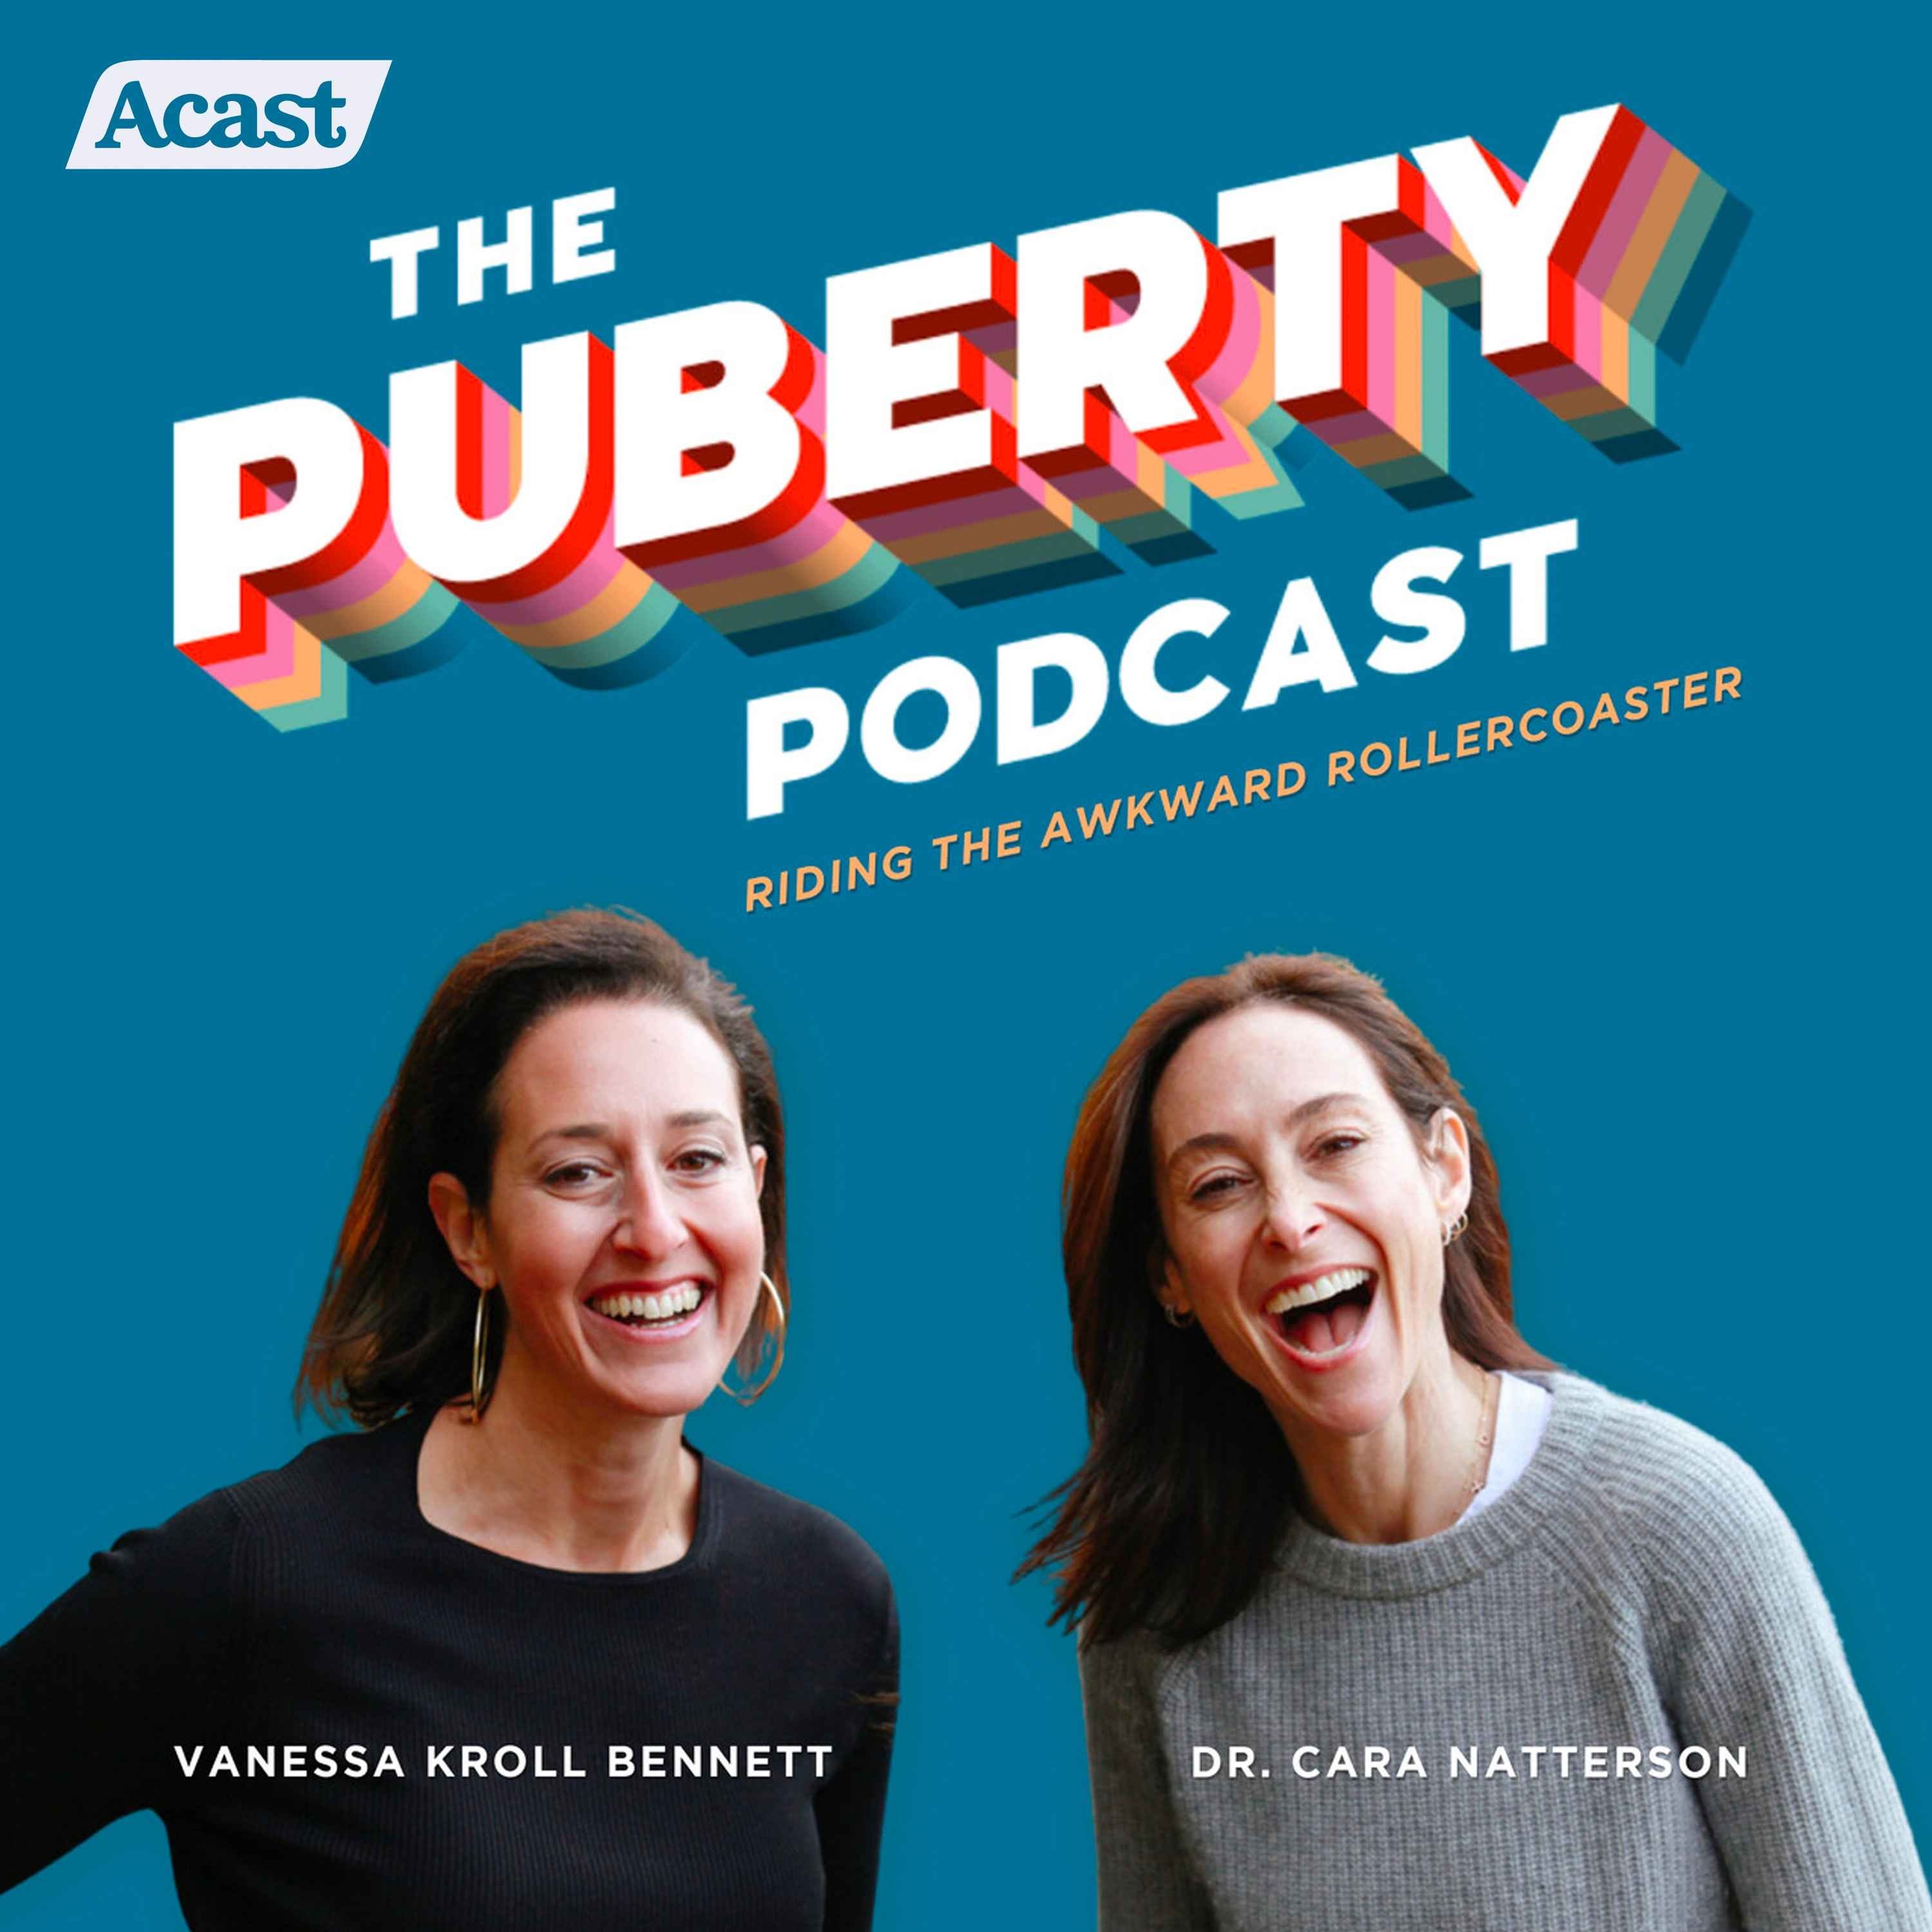 The Puberty Podcast:The Puberty Podcast, Peoples Media